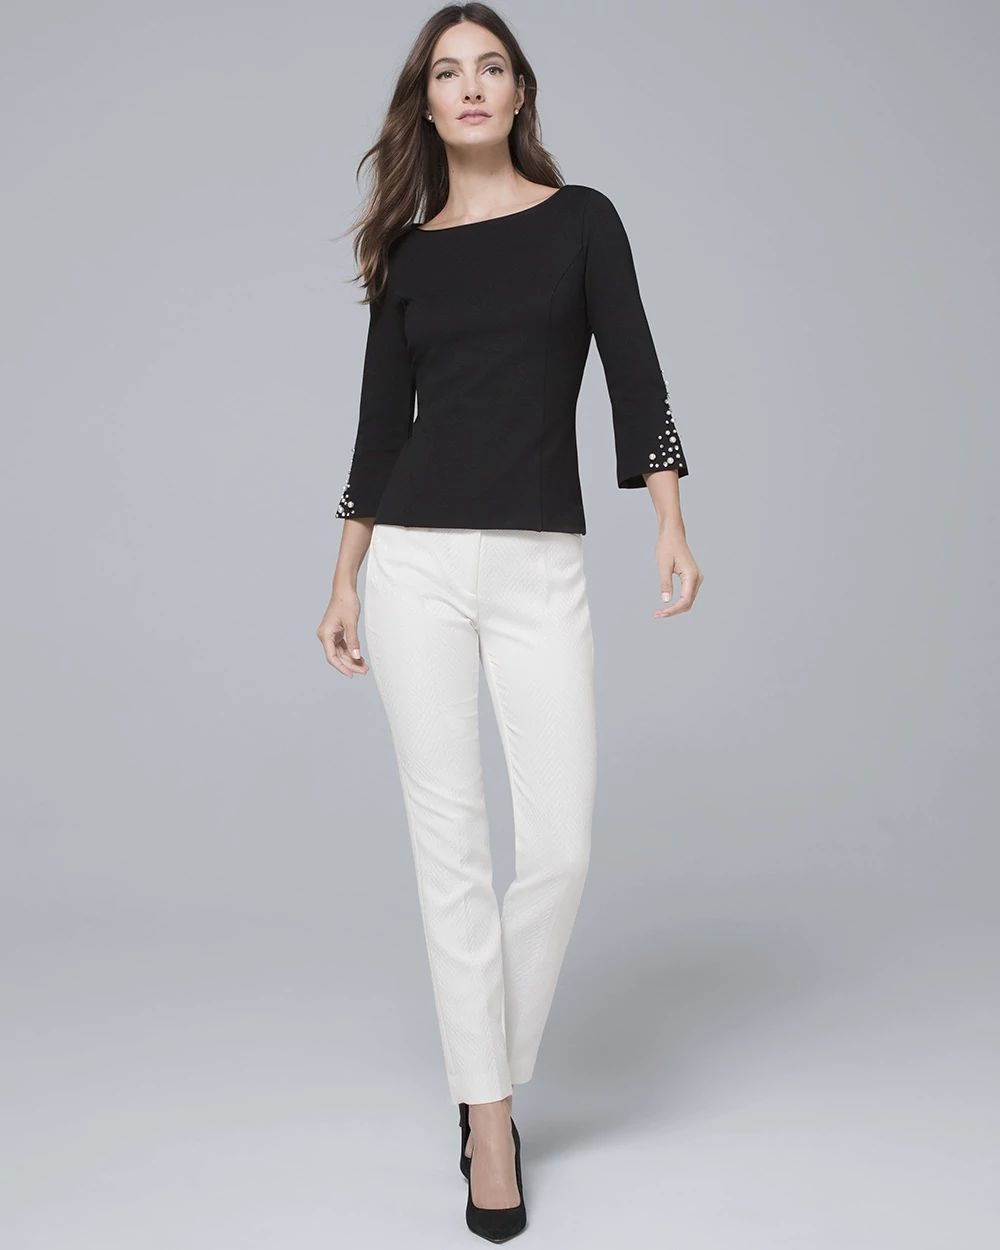 Geo-Texture Slim Ankle Pants click to view larger image.